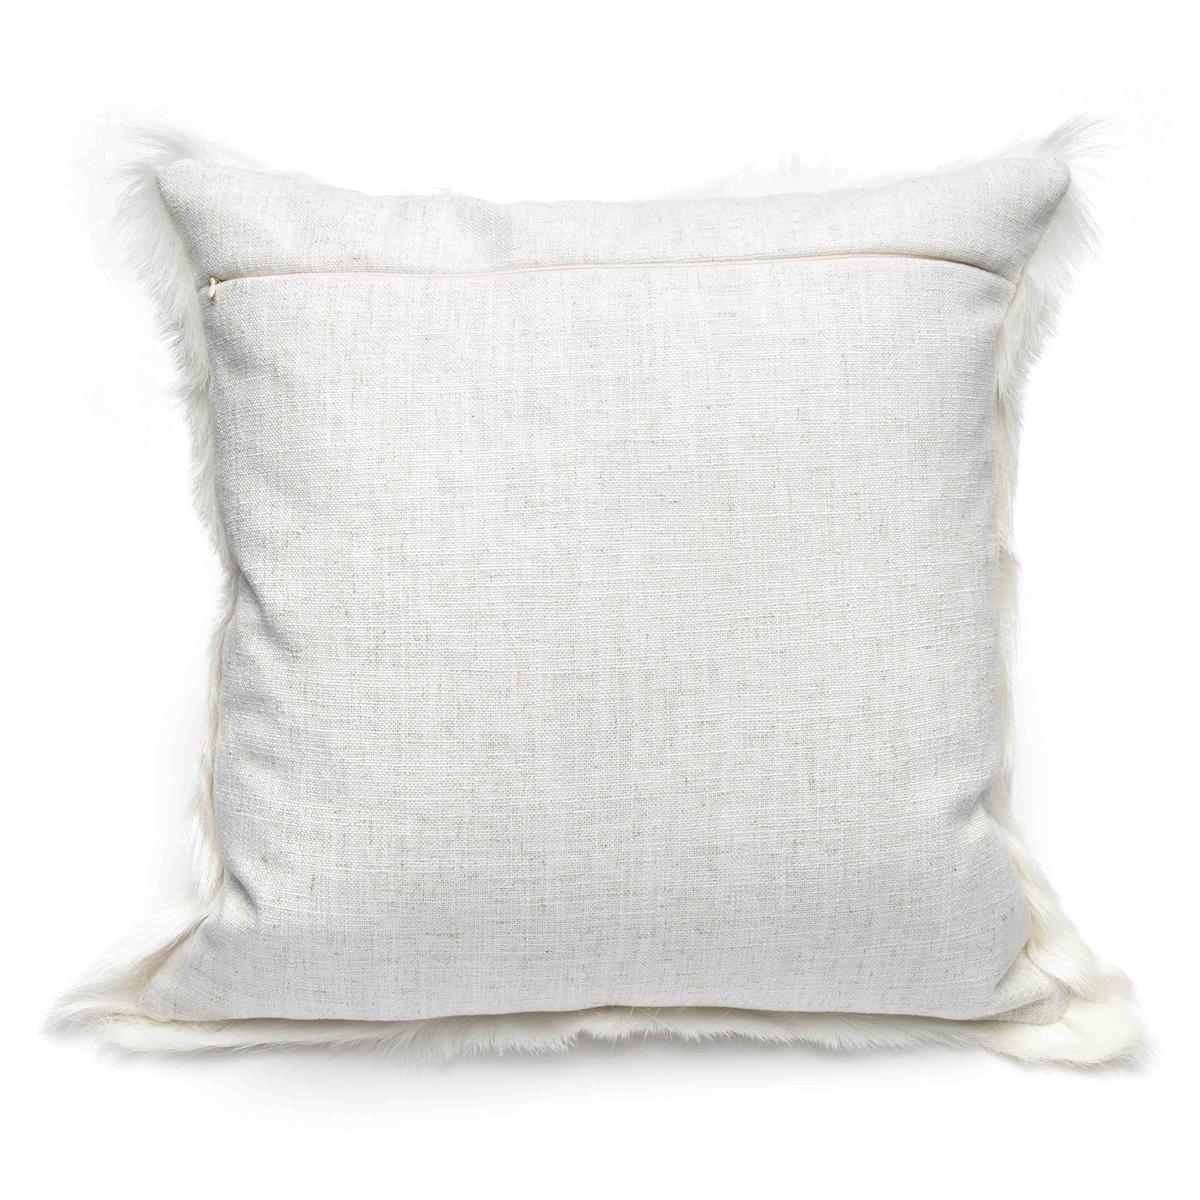 Industrial Goat Hair Pillow Cushion, Natural White Customized For Sale